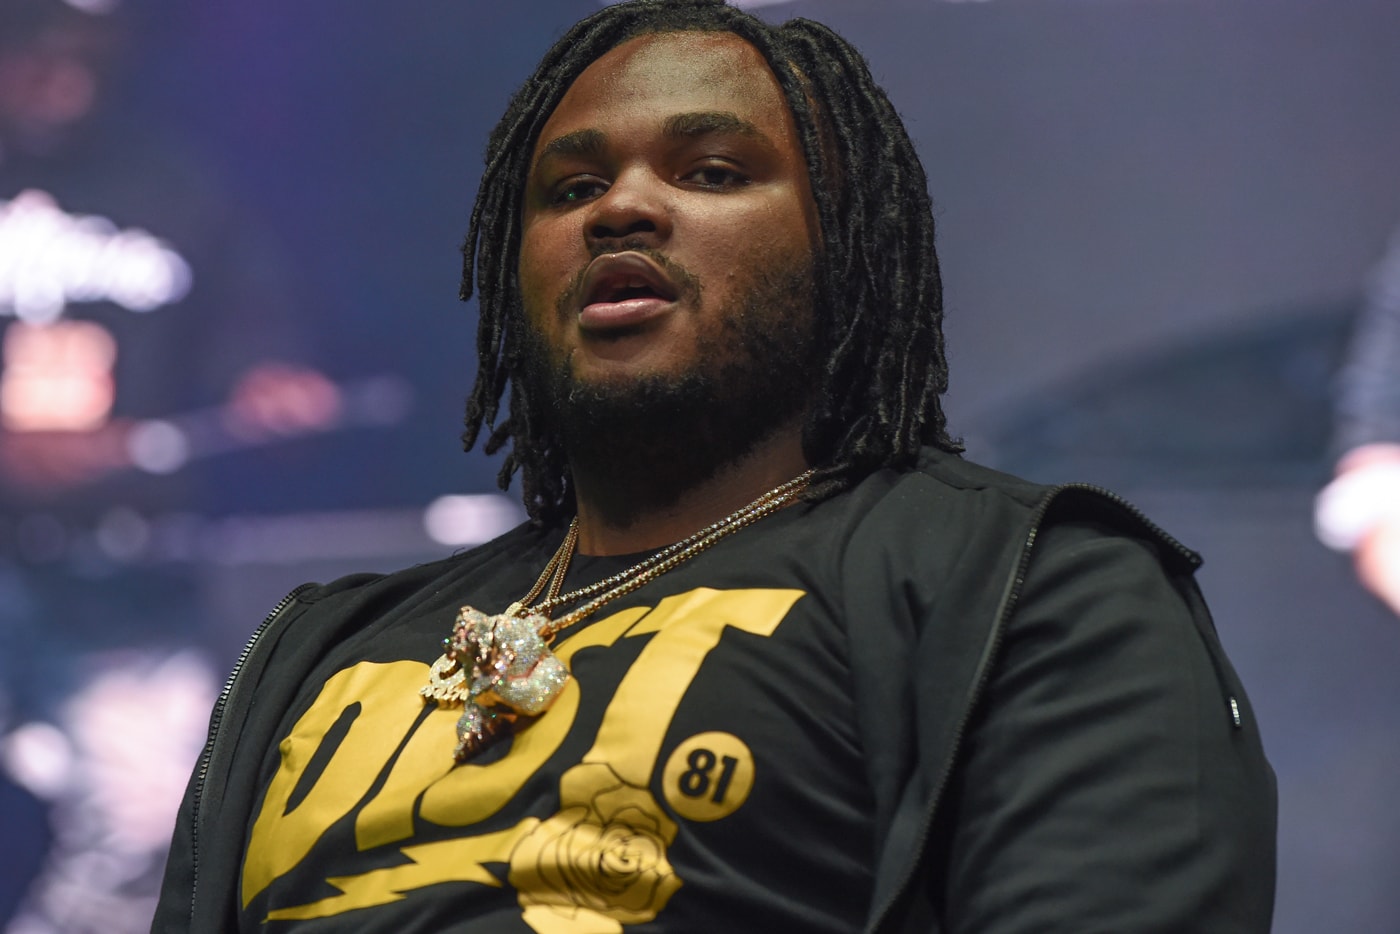 Tee Grizzley 300 Entertainment 2017